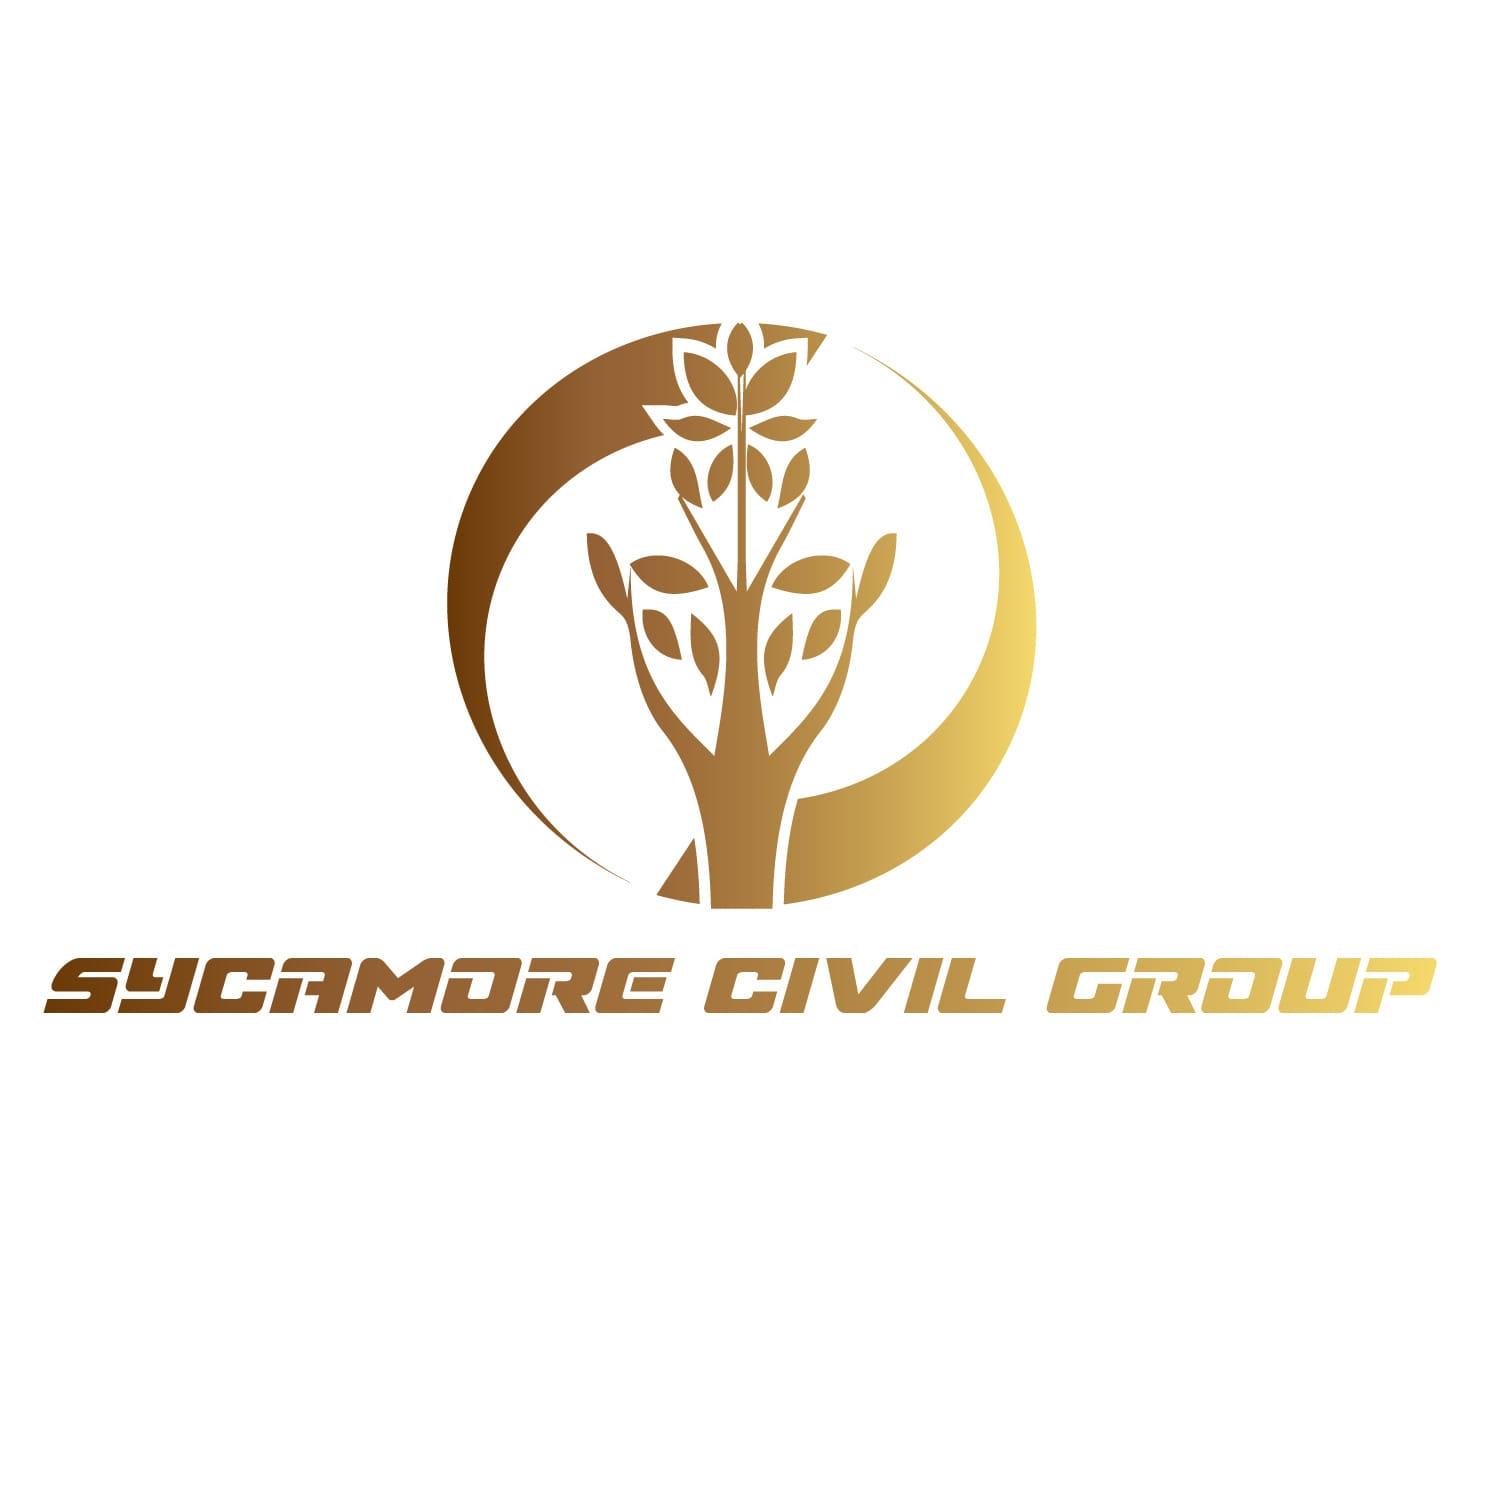 Sycamore Civil Group